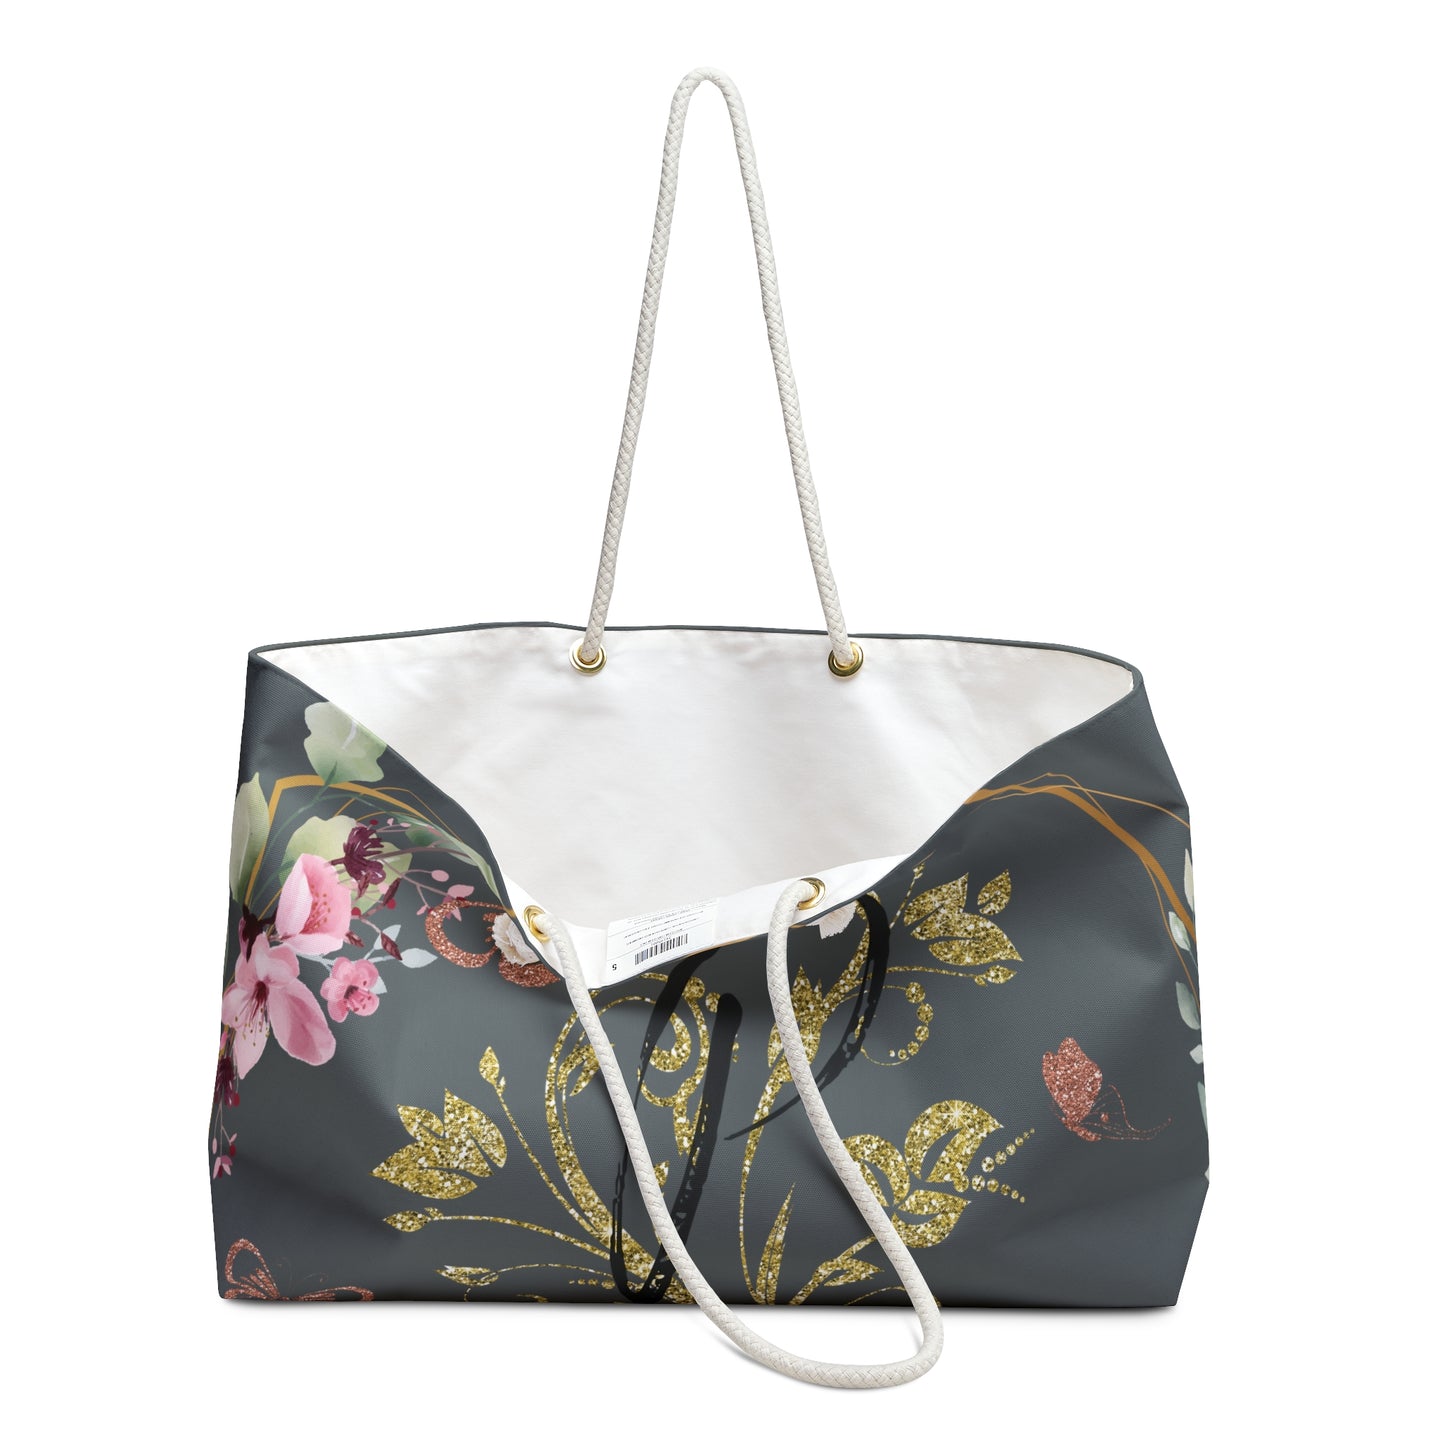 Perfect fabric bag for weekend getaways, spacious for your weekend adventures, practical and stylish